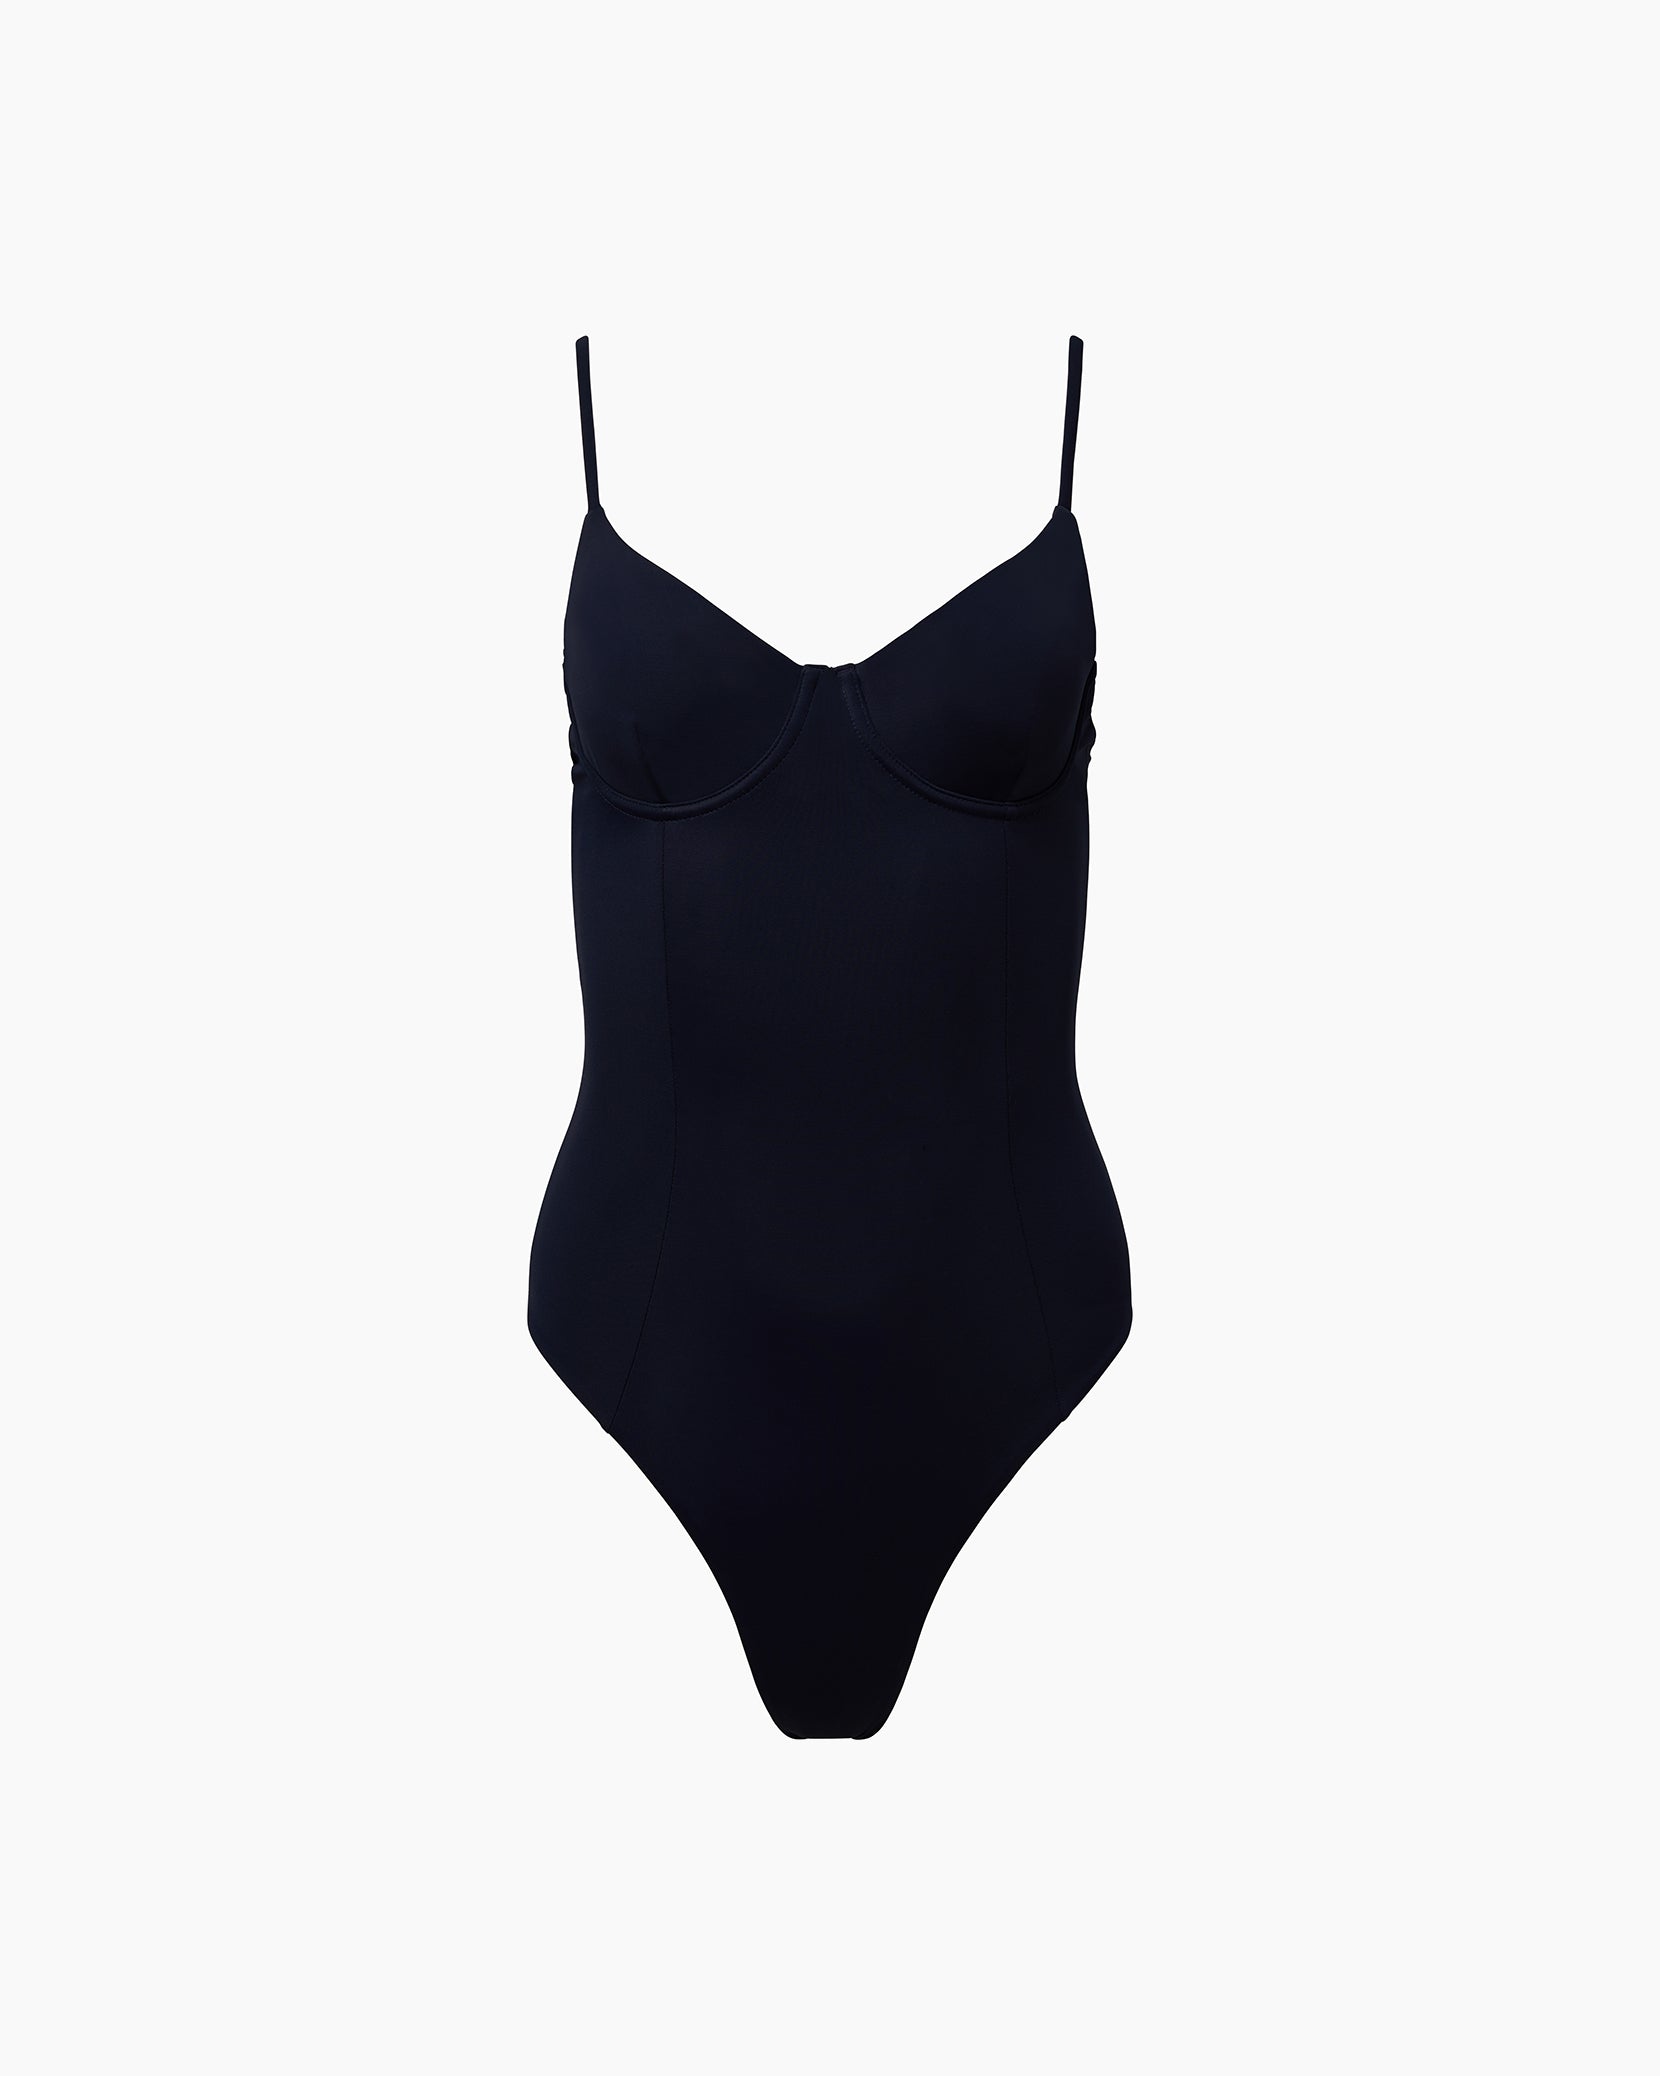 Criss-Cross Navy One Piece Bathing Suit - Tatyana Clothing